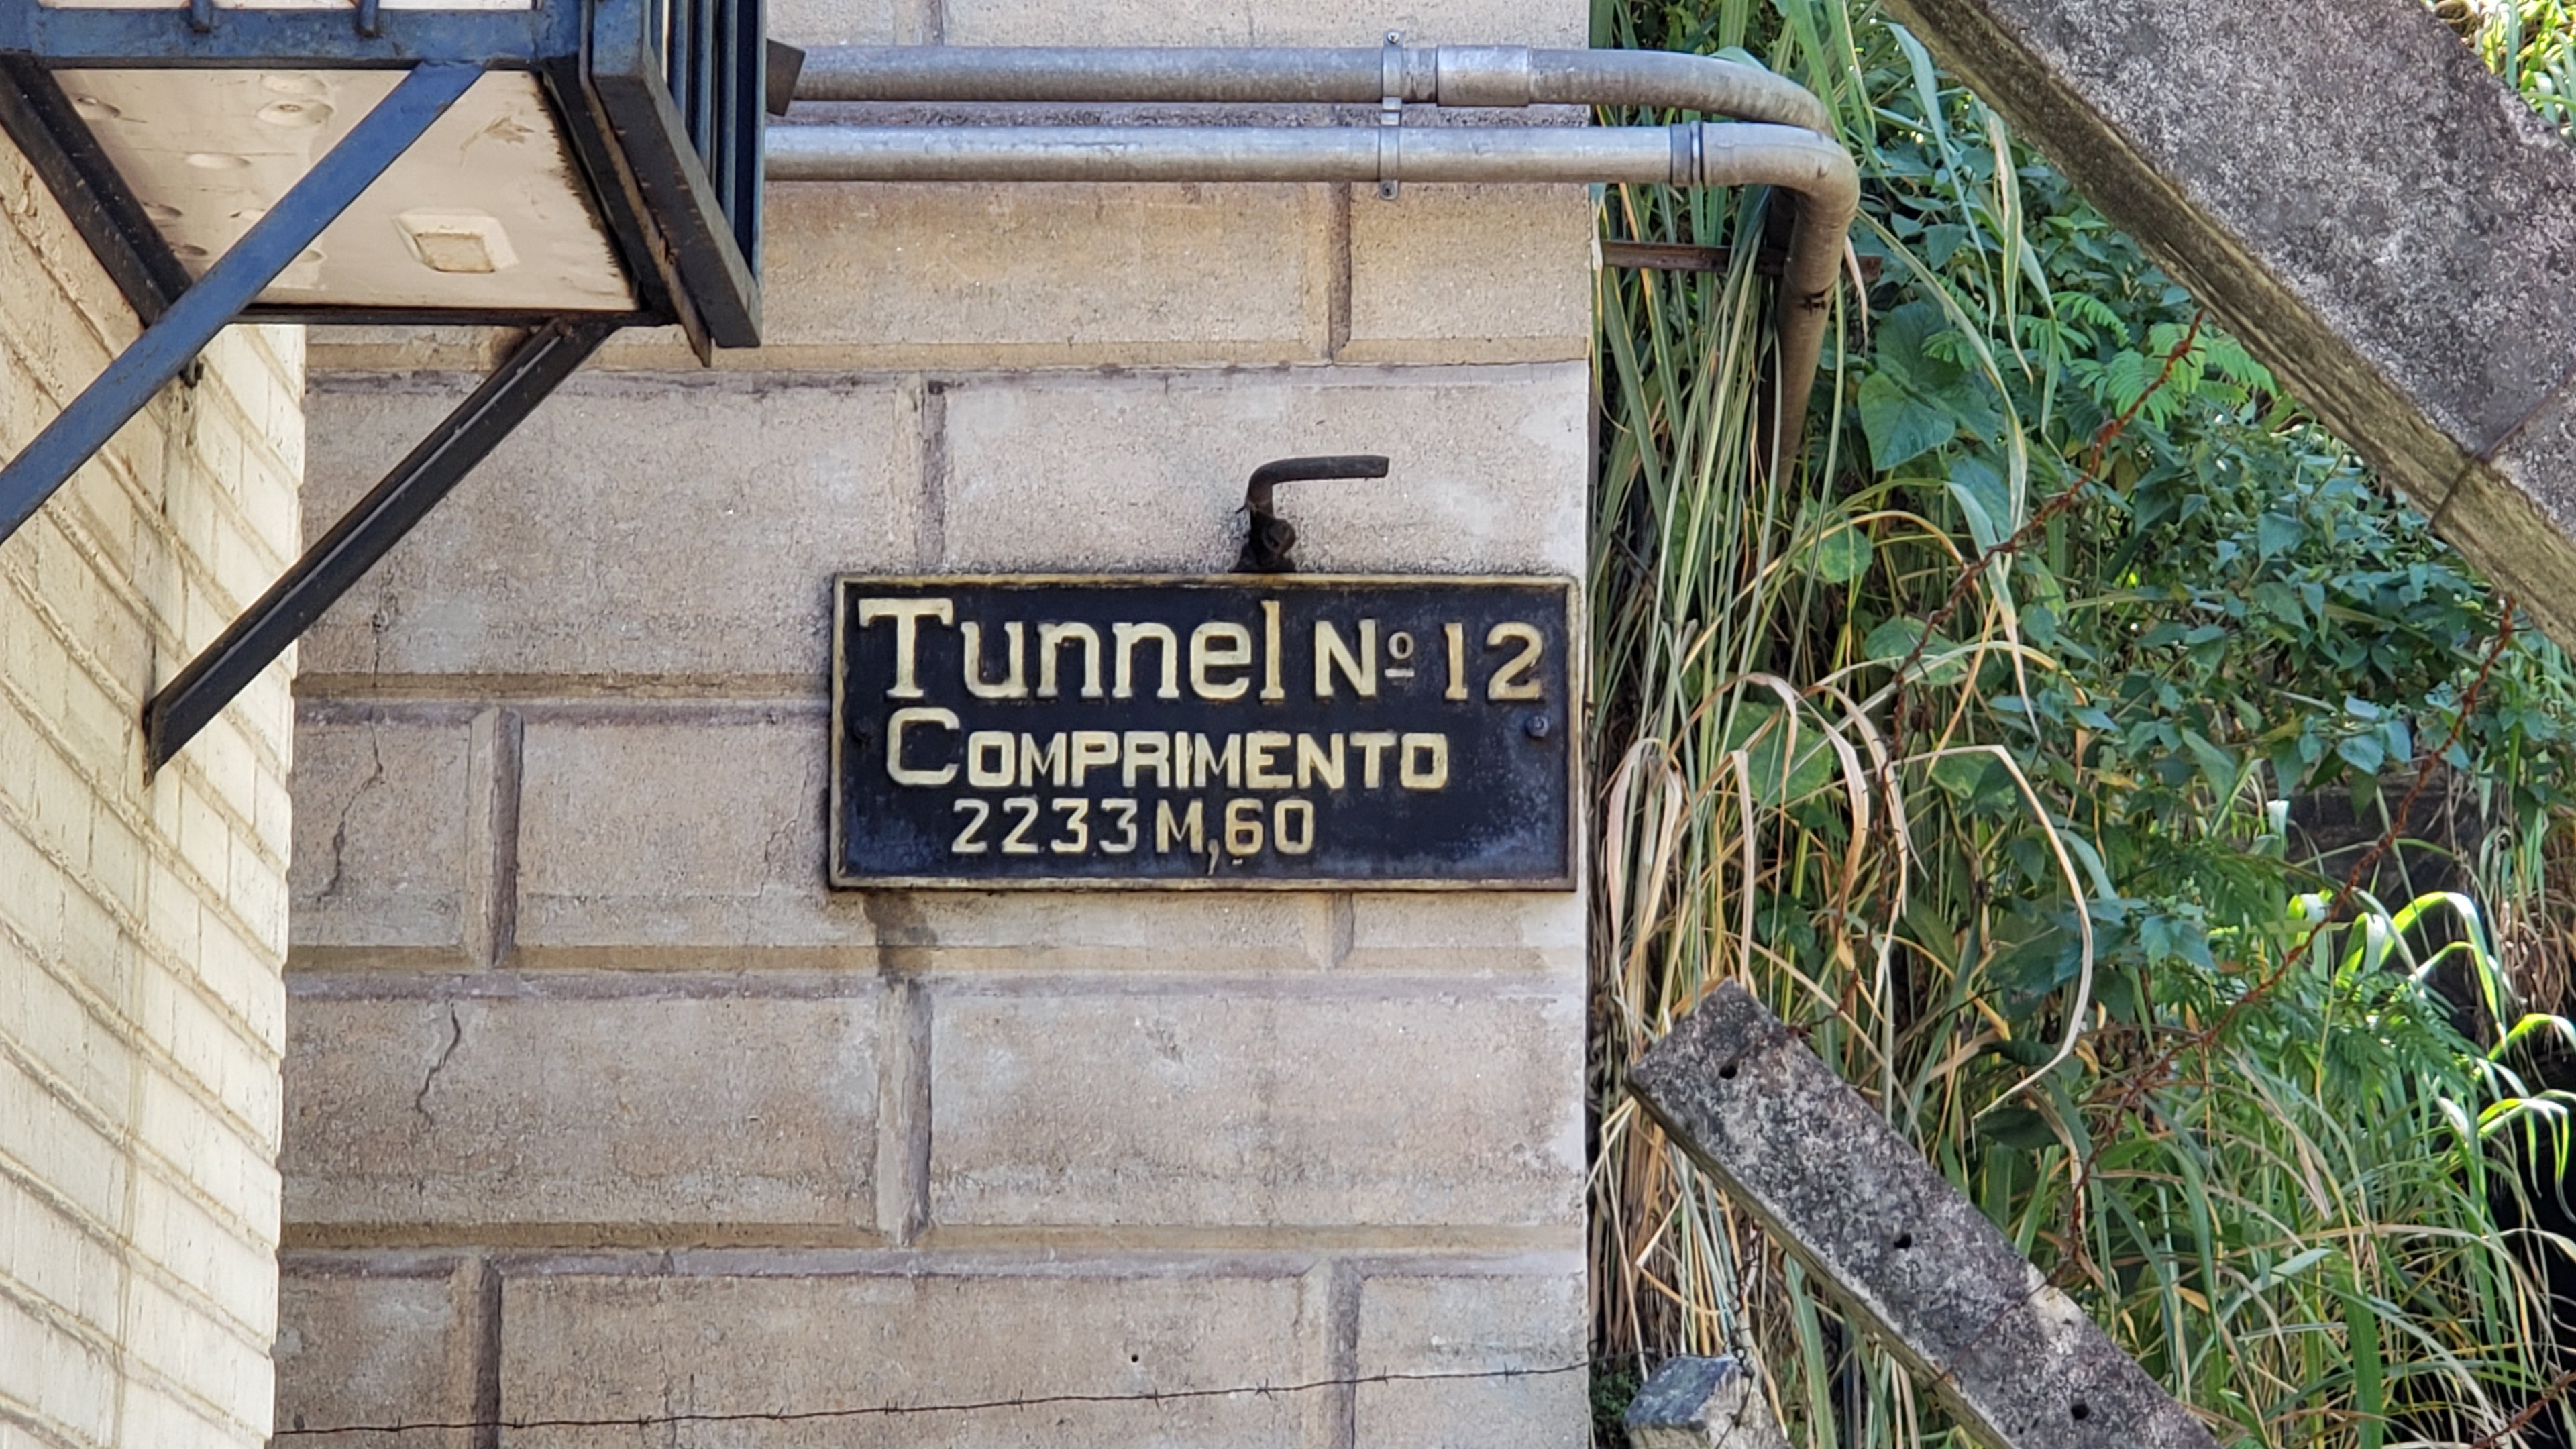 The plate of tunnel 12